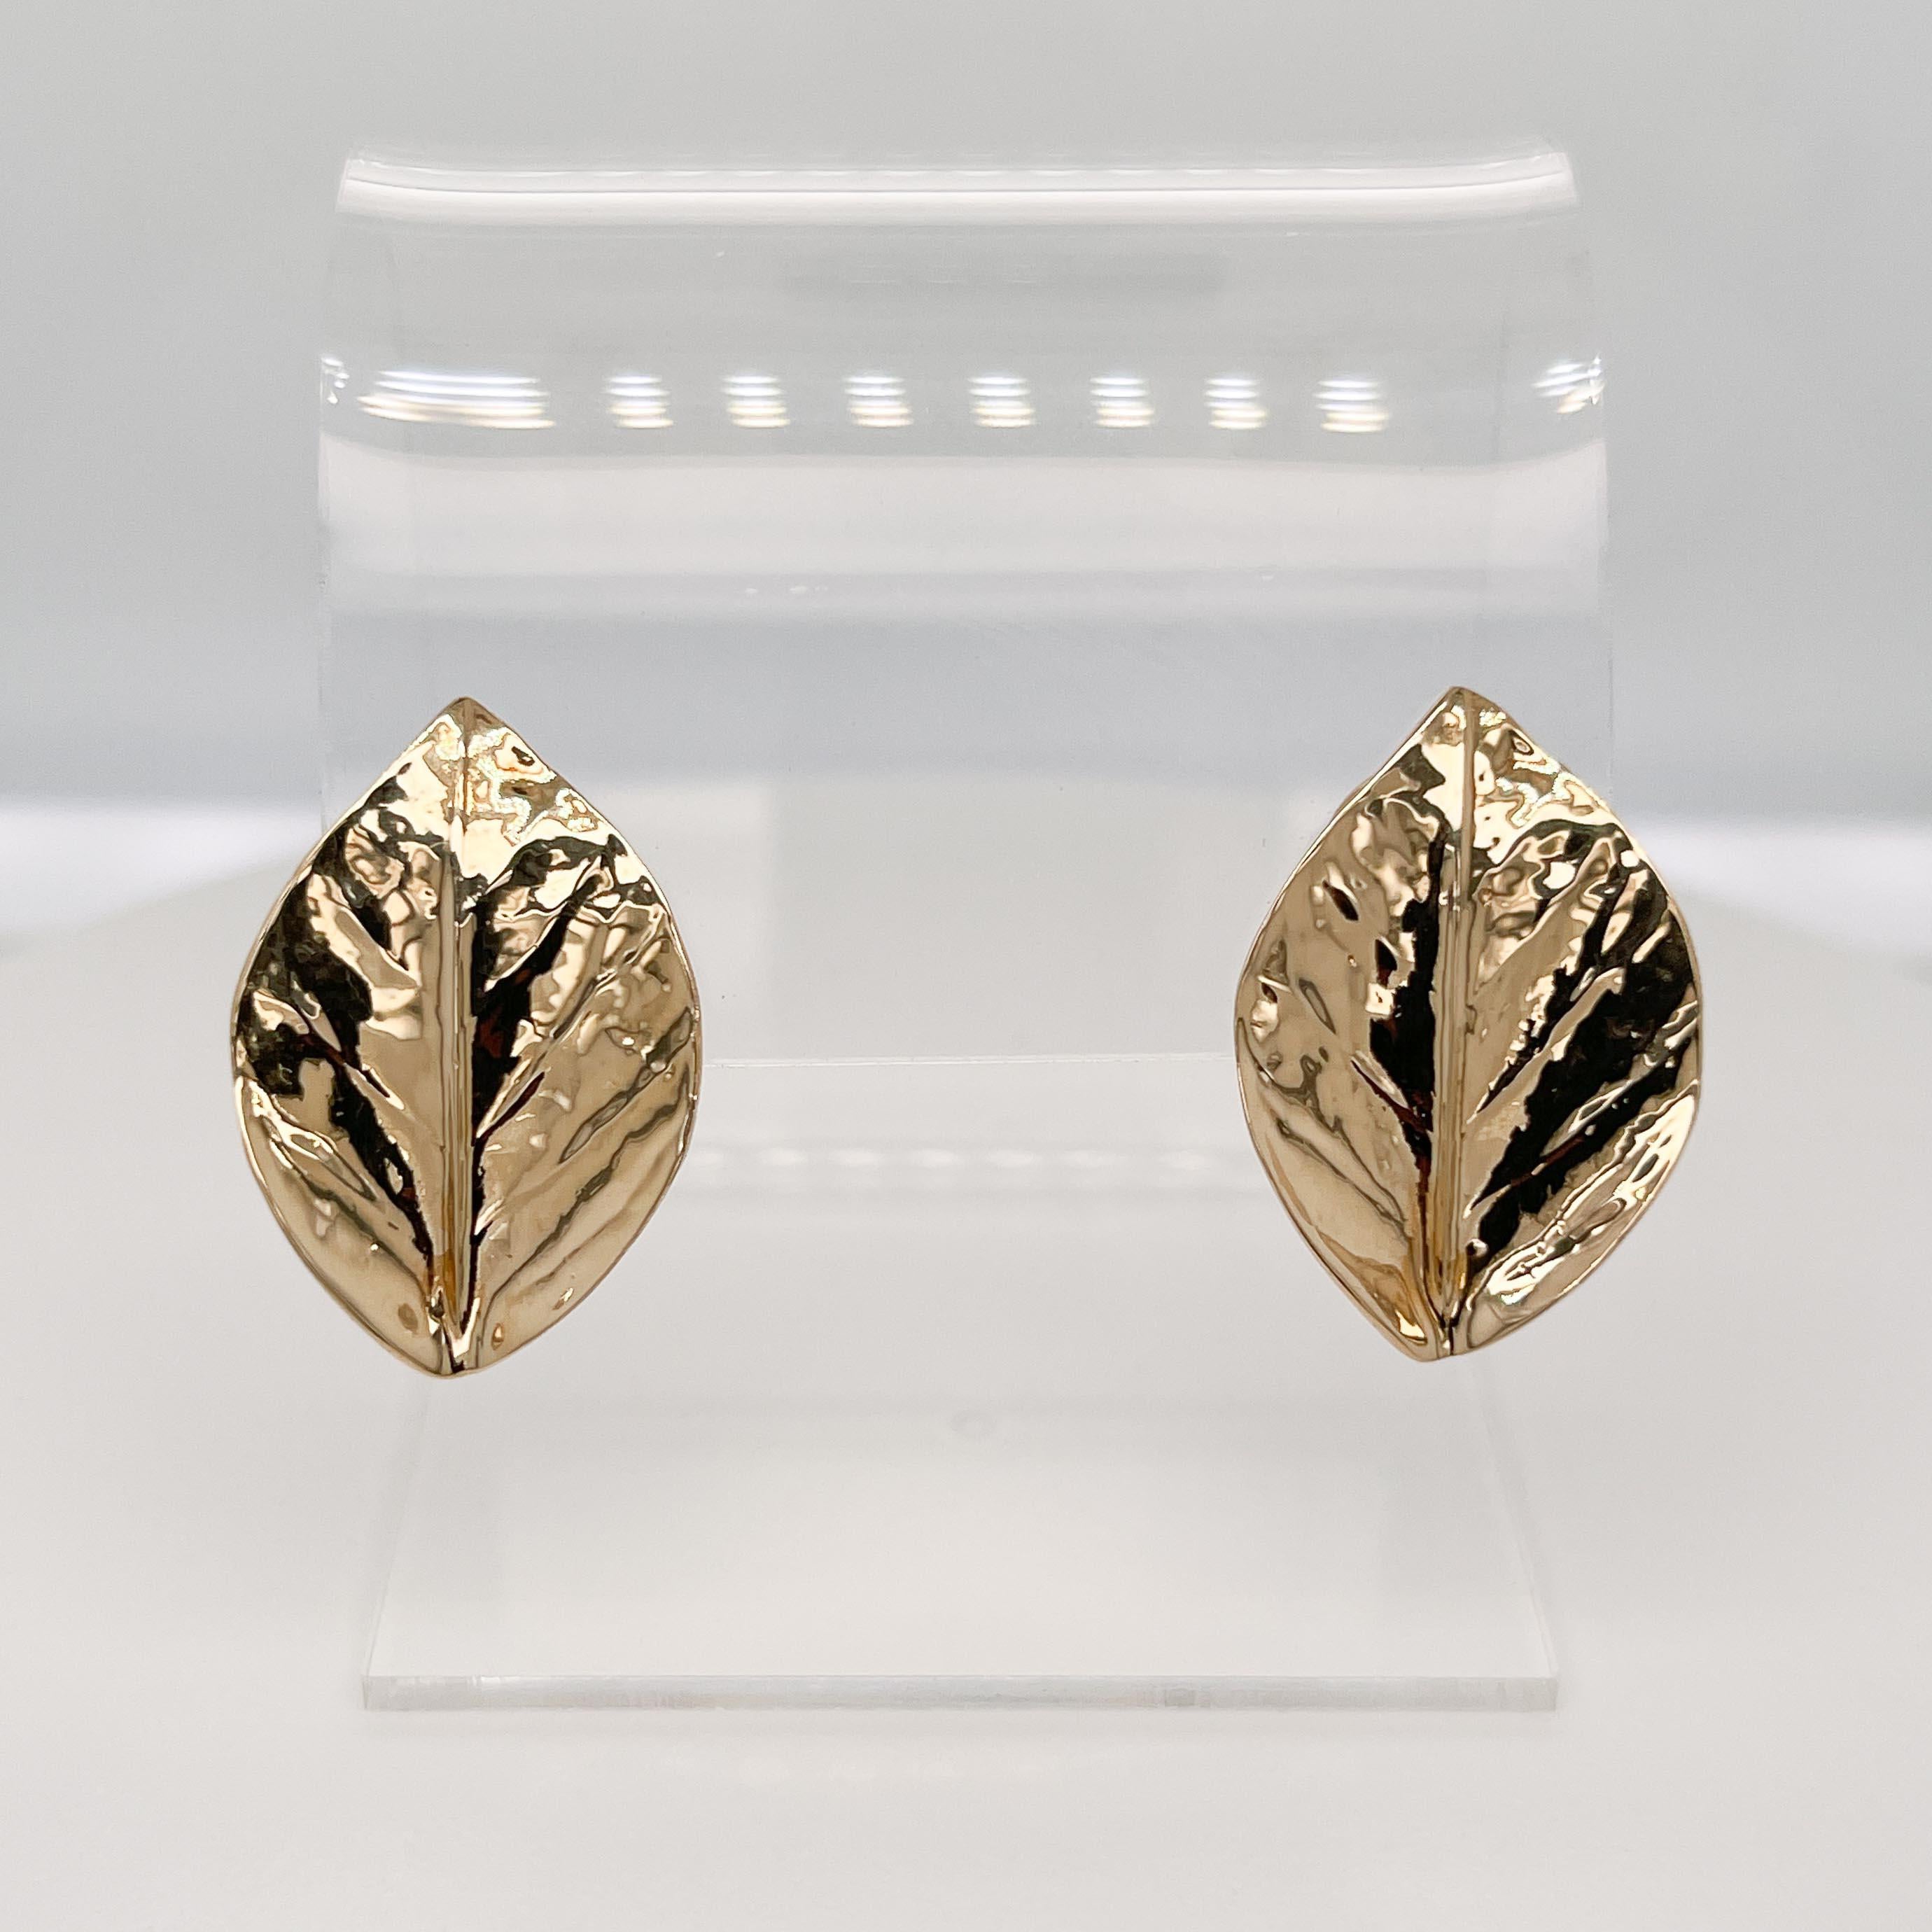 A fine pair of gold leaf-shaped earrings.

With a textured surface on front and omega clips to the back.

Simply a finely crafted pair of earrings!

Date:
20th Century

Overall Condition:
They are in overall good, as-pictured, used estate condition